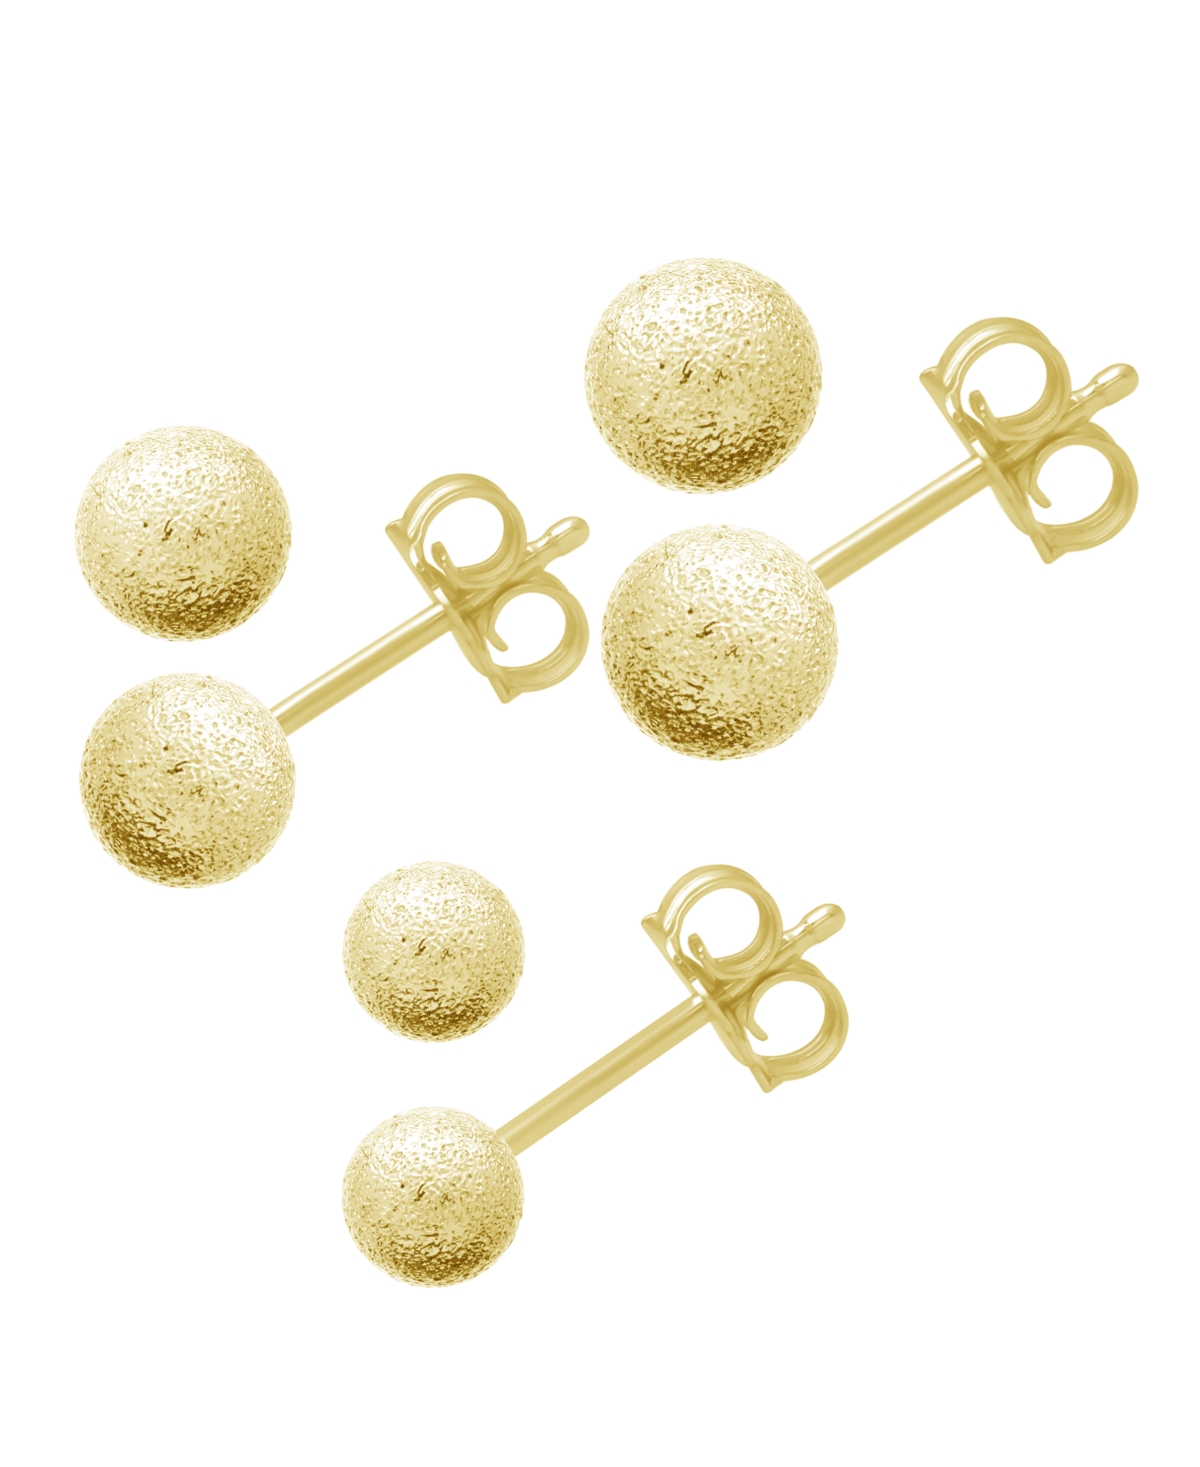 And Now This 3 Piece Textured Ball Stud Set in Silver Plate - Gold